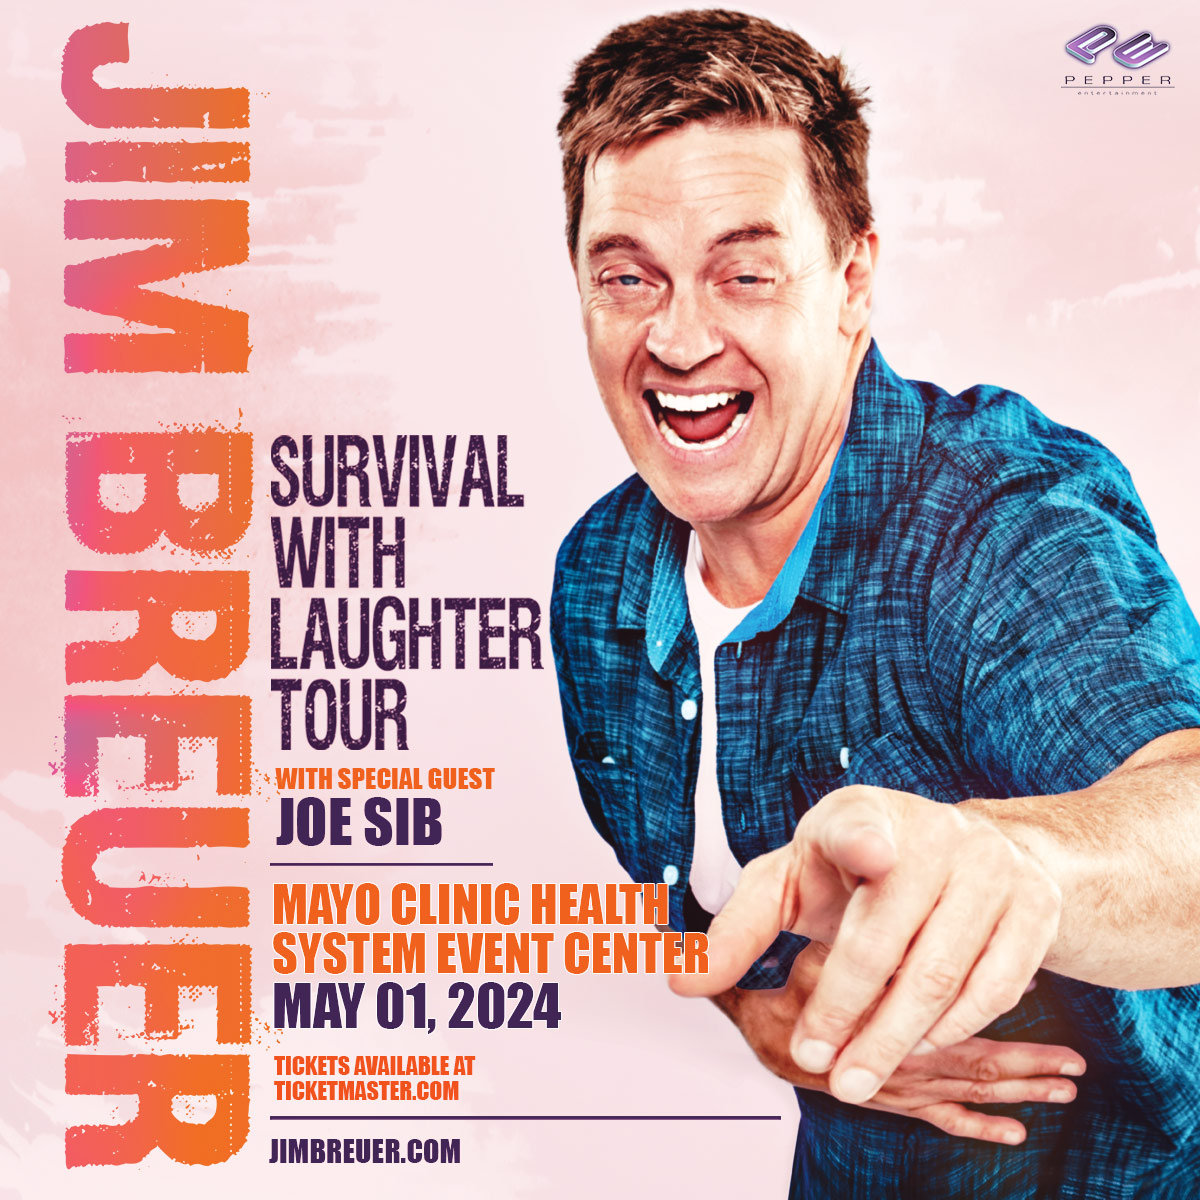 <h1 class="tribe-events-single-event-title">Jim Breuer/ In Mankato Wednesday, May 1,2024</h1>